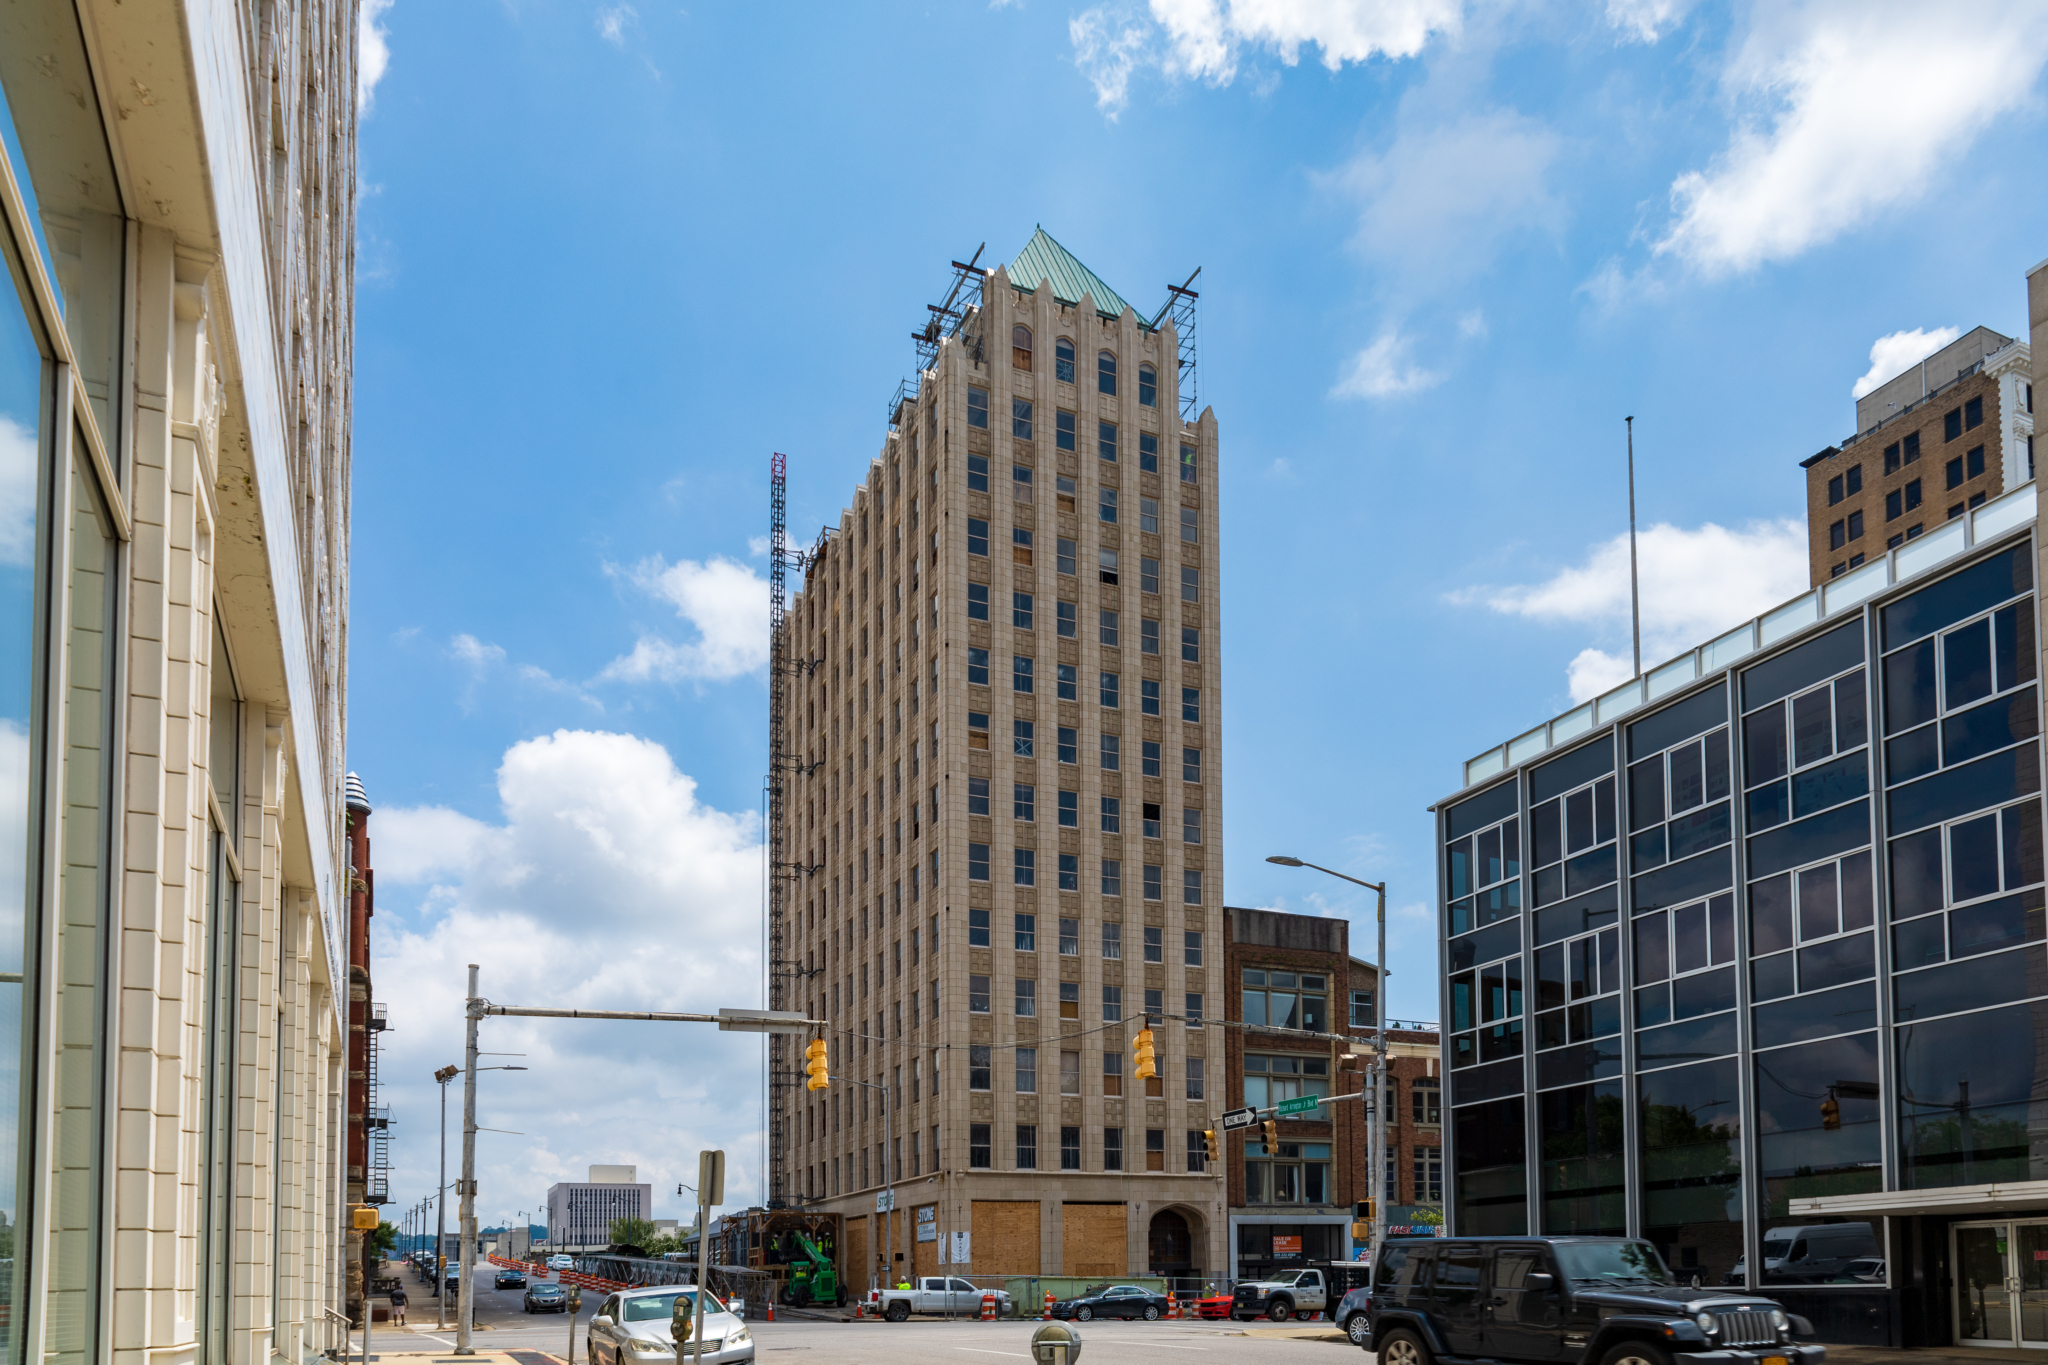 protectivelife 5502 Upcoming Kelly Hotel in historic Birmingham building set to open Spring 2021